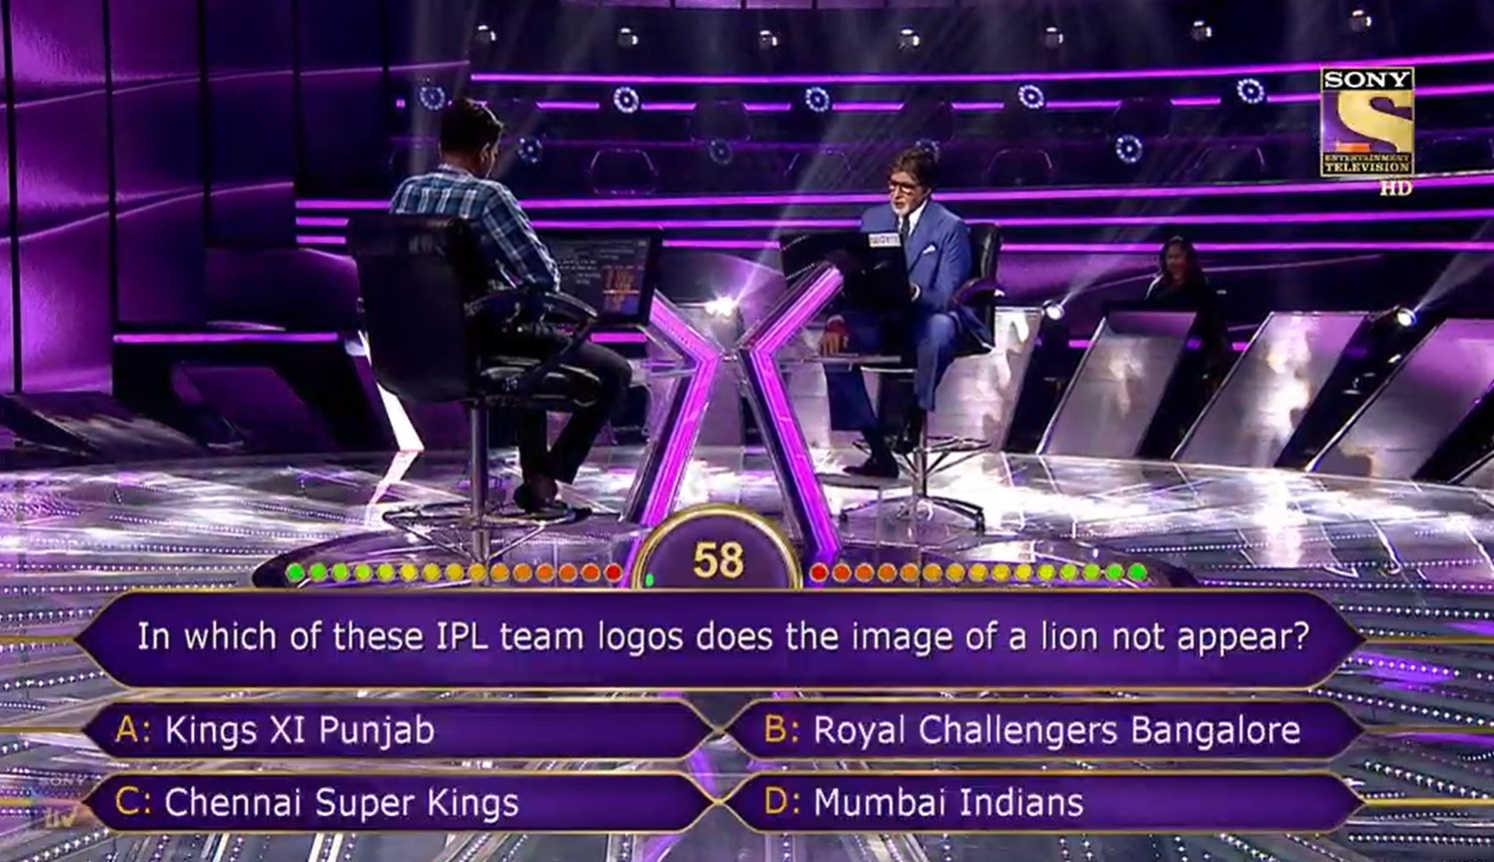 Ques : In which of these IPL team logos does the image of a lion not appear?